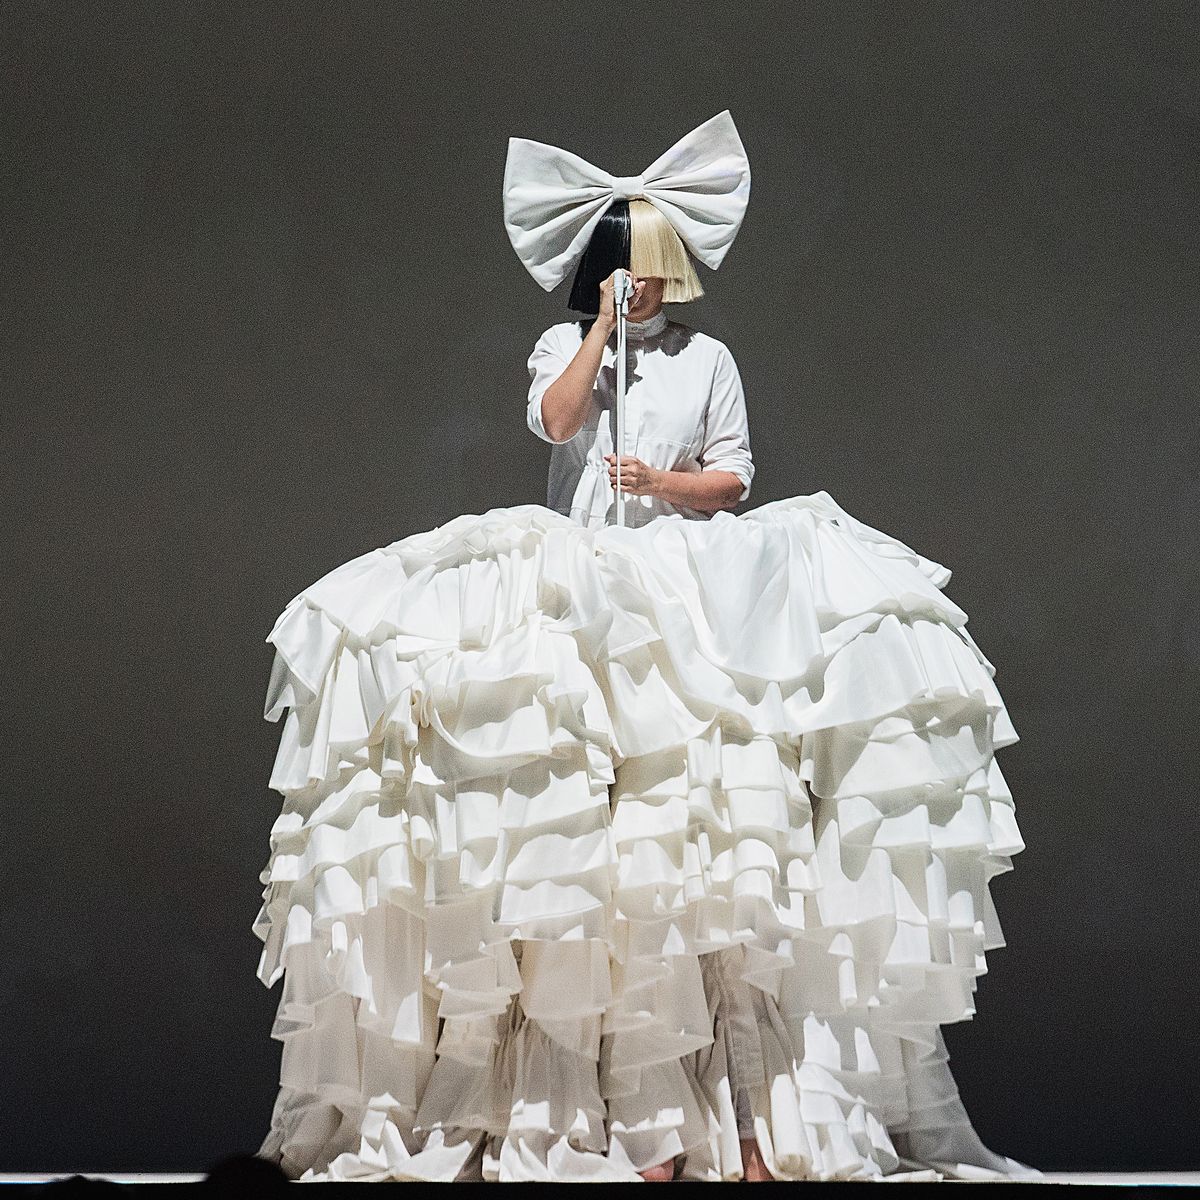 seattle, wa   september 29  sia performs on stage during the opening night of her nostalgic for the present tour at keyarena on september 29, 2016 in seattle, washington  photo by mat haywardgetty images